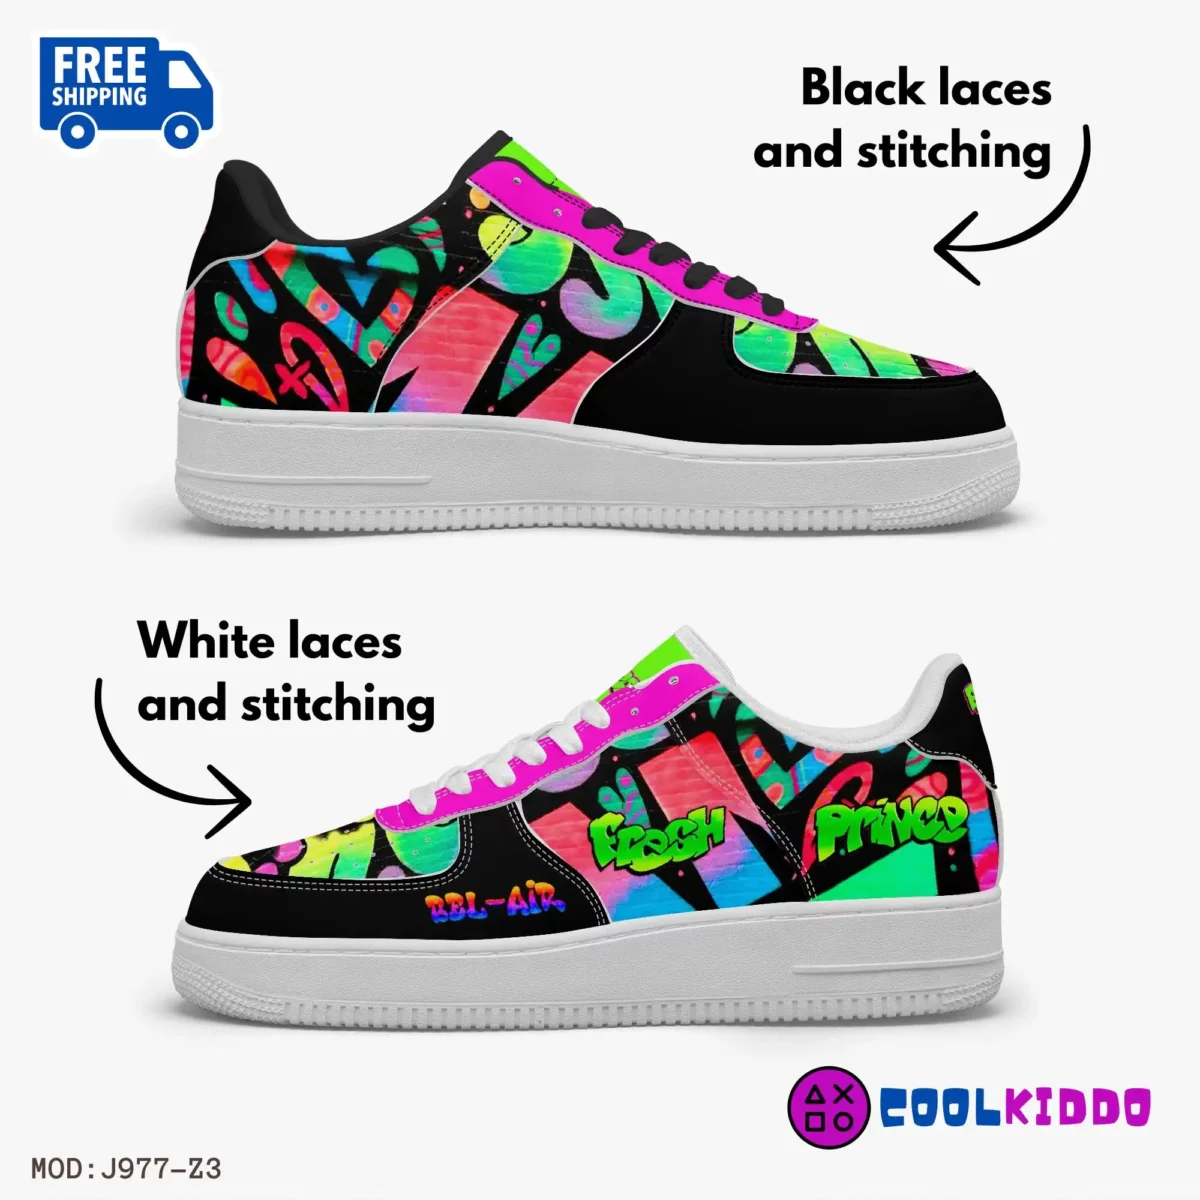 Custom Fresh Prince of Bel-Air AF1 Low-Top Leather Sneakers, Casual Shoes for any season. 90’s TV Show Inspired Cool Kiddo 20